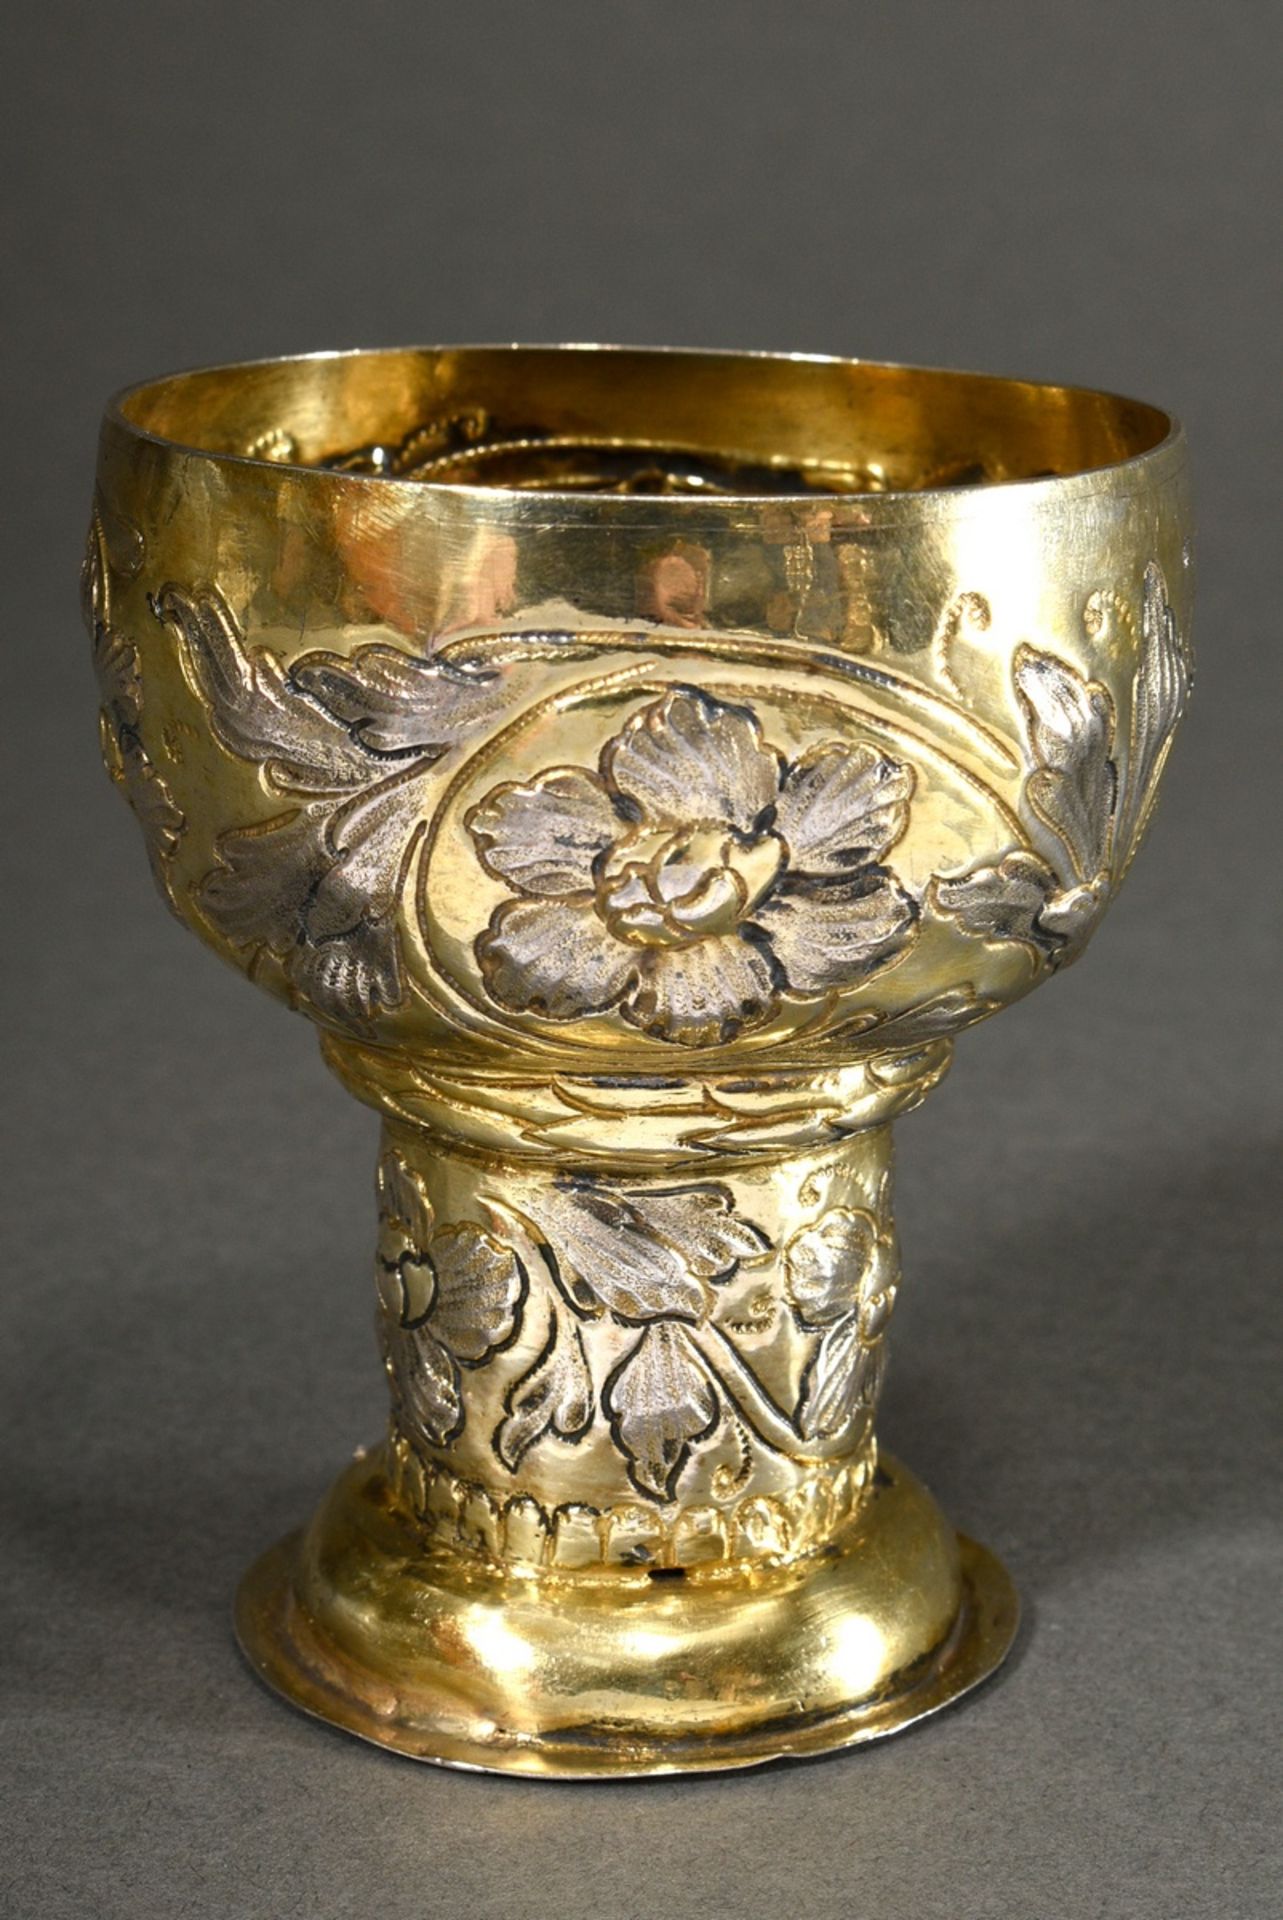 A Nuremberg Roman goblet with embossed flower tendril decoration and laurel leaf cuff under the cup - Image 2 of 6